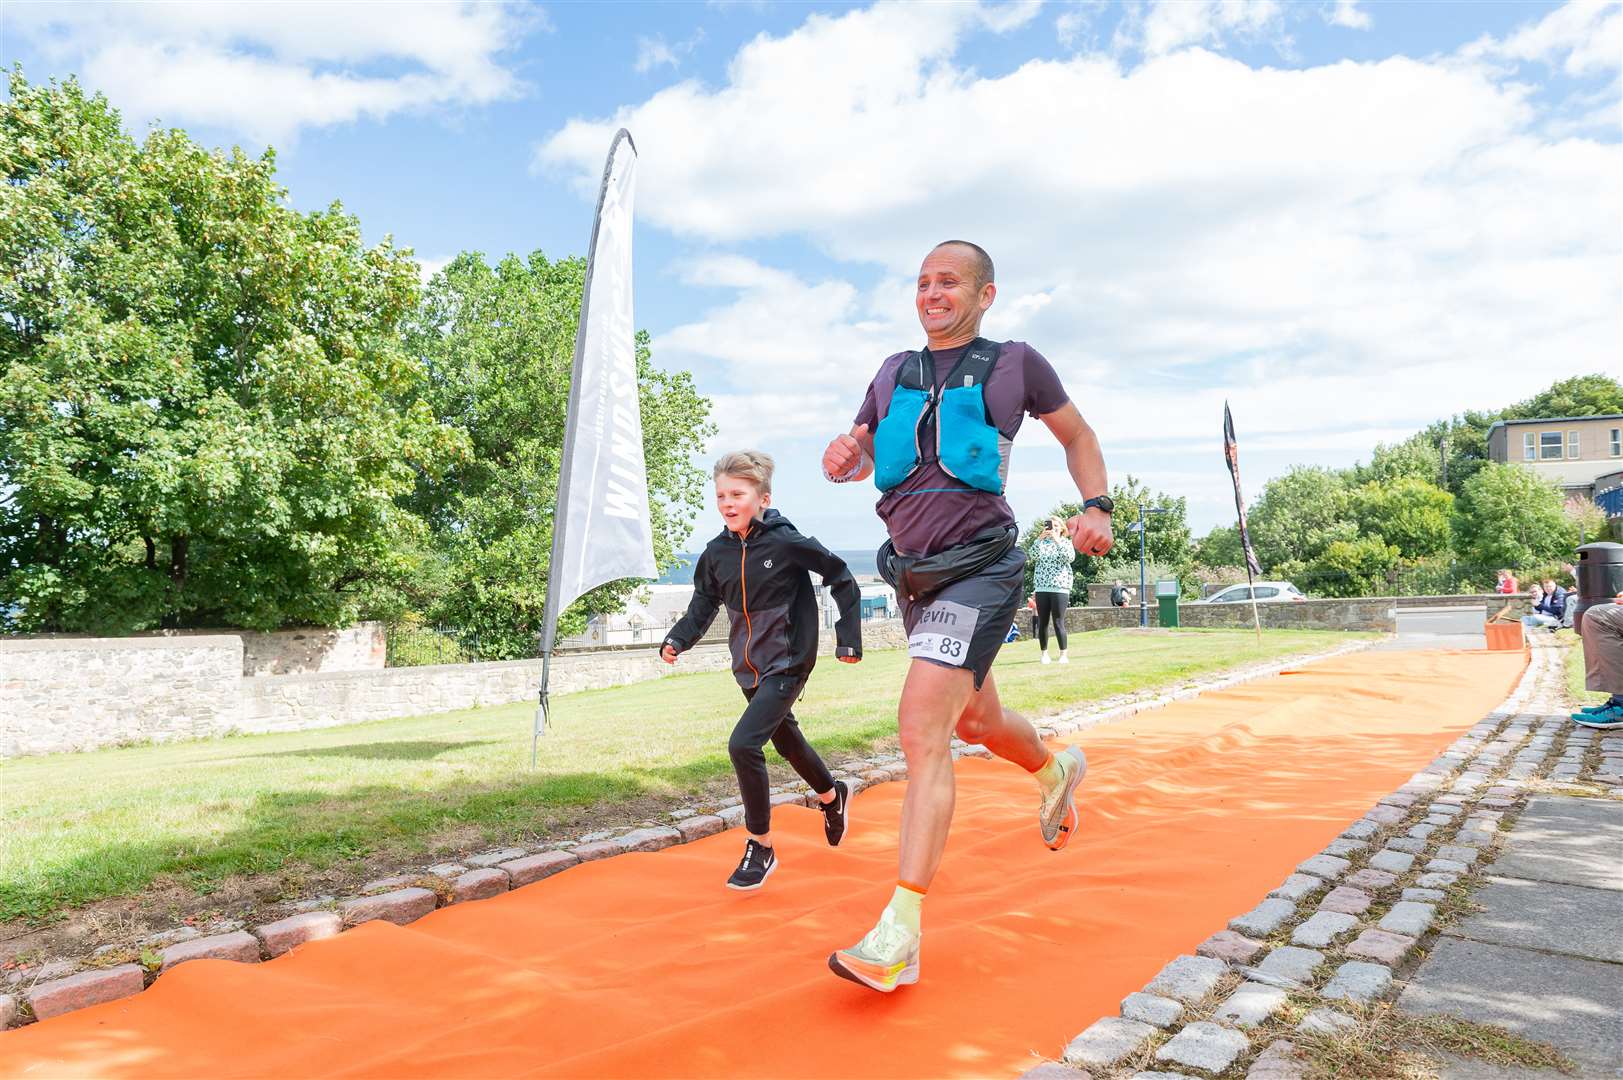 Kevin Mottram joined by his son at the finish. Photo: Angus Mclennan